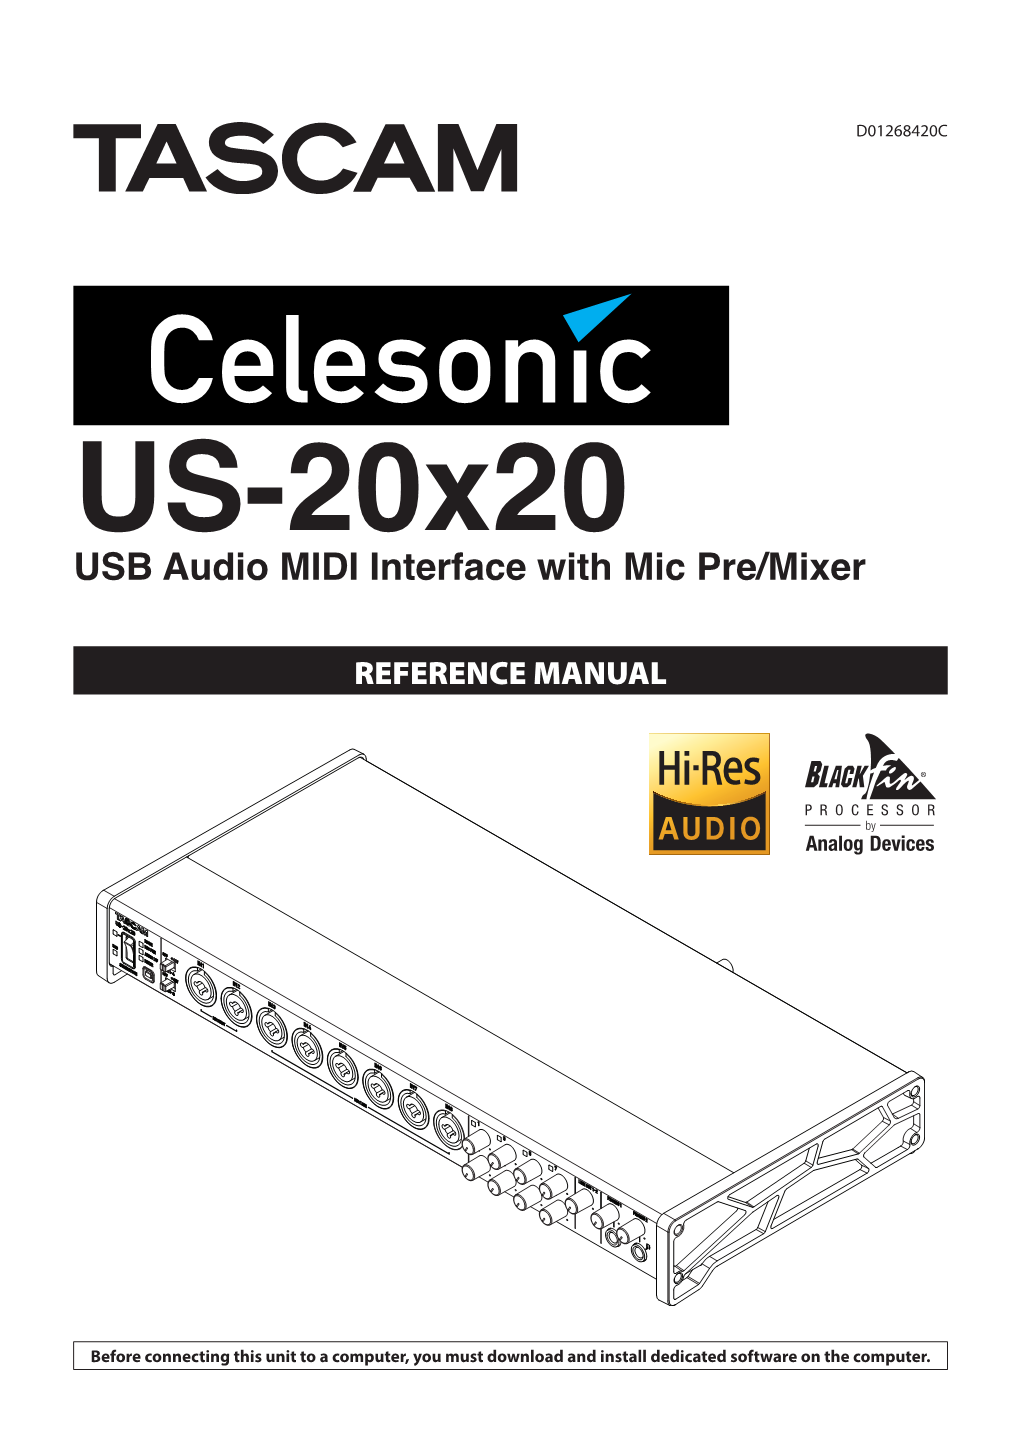 US-20X20 Reference Manual